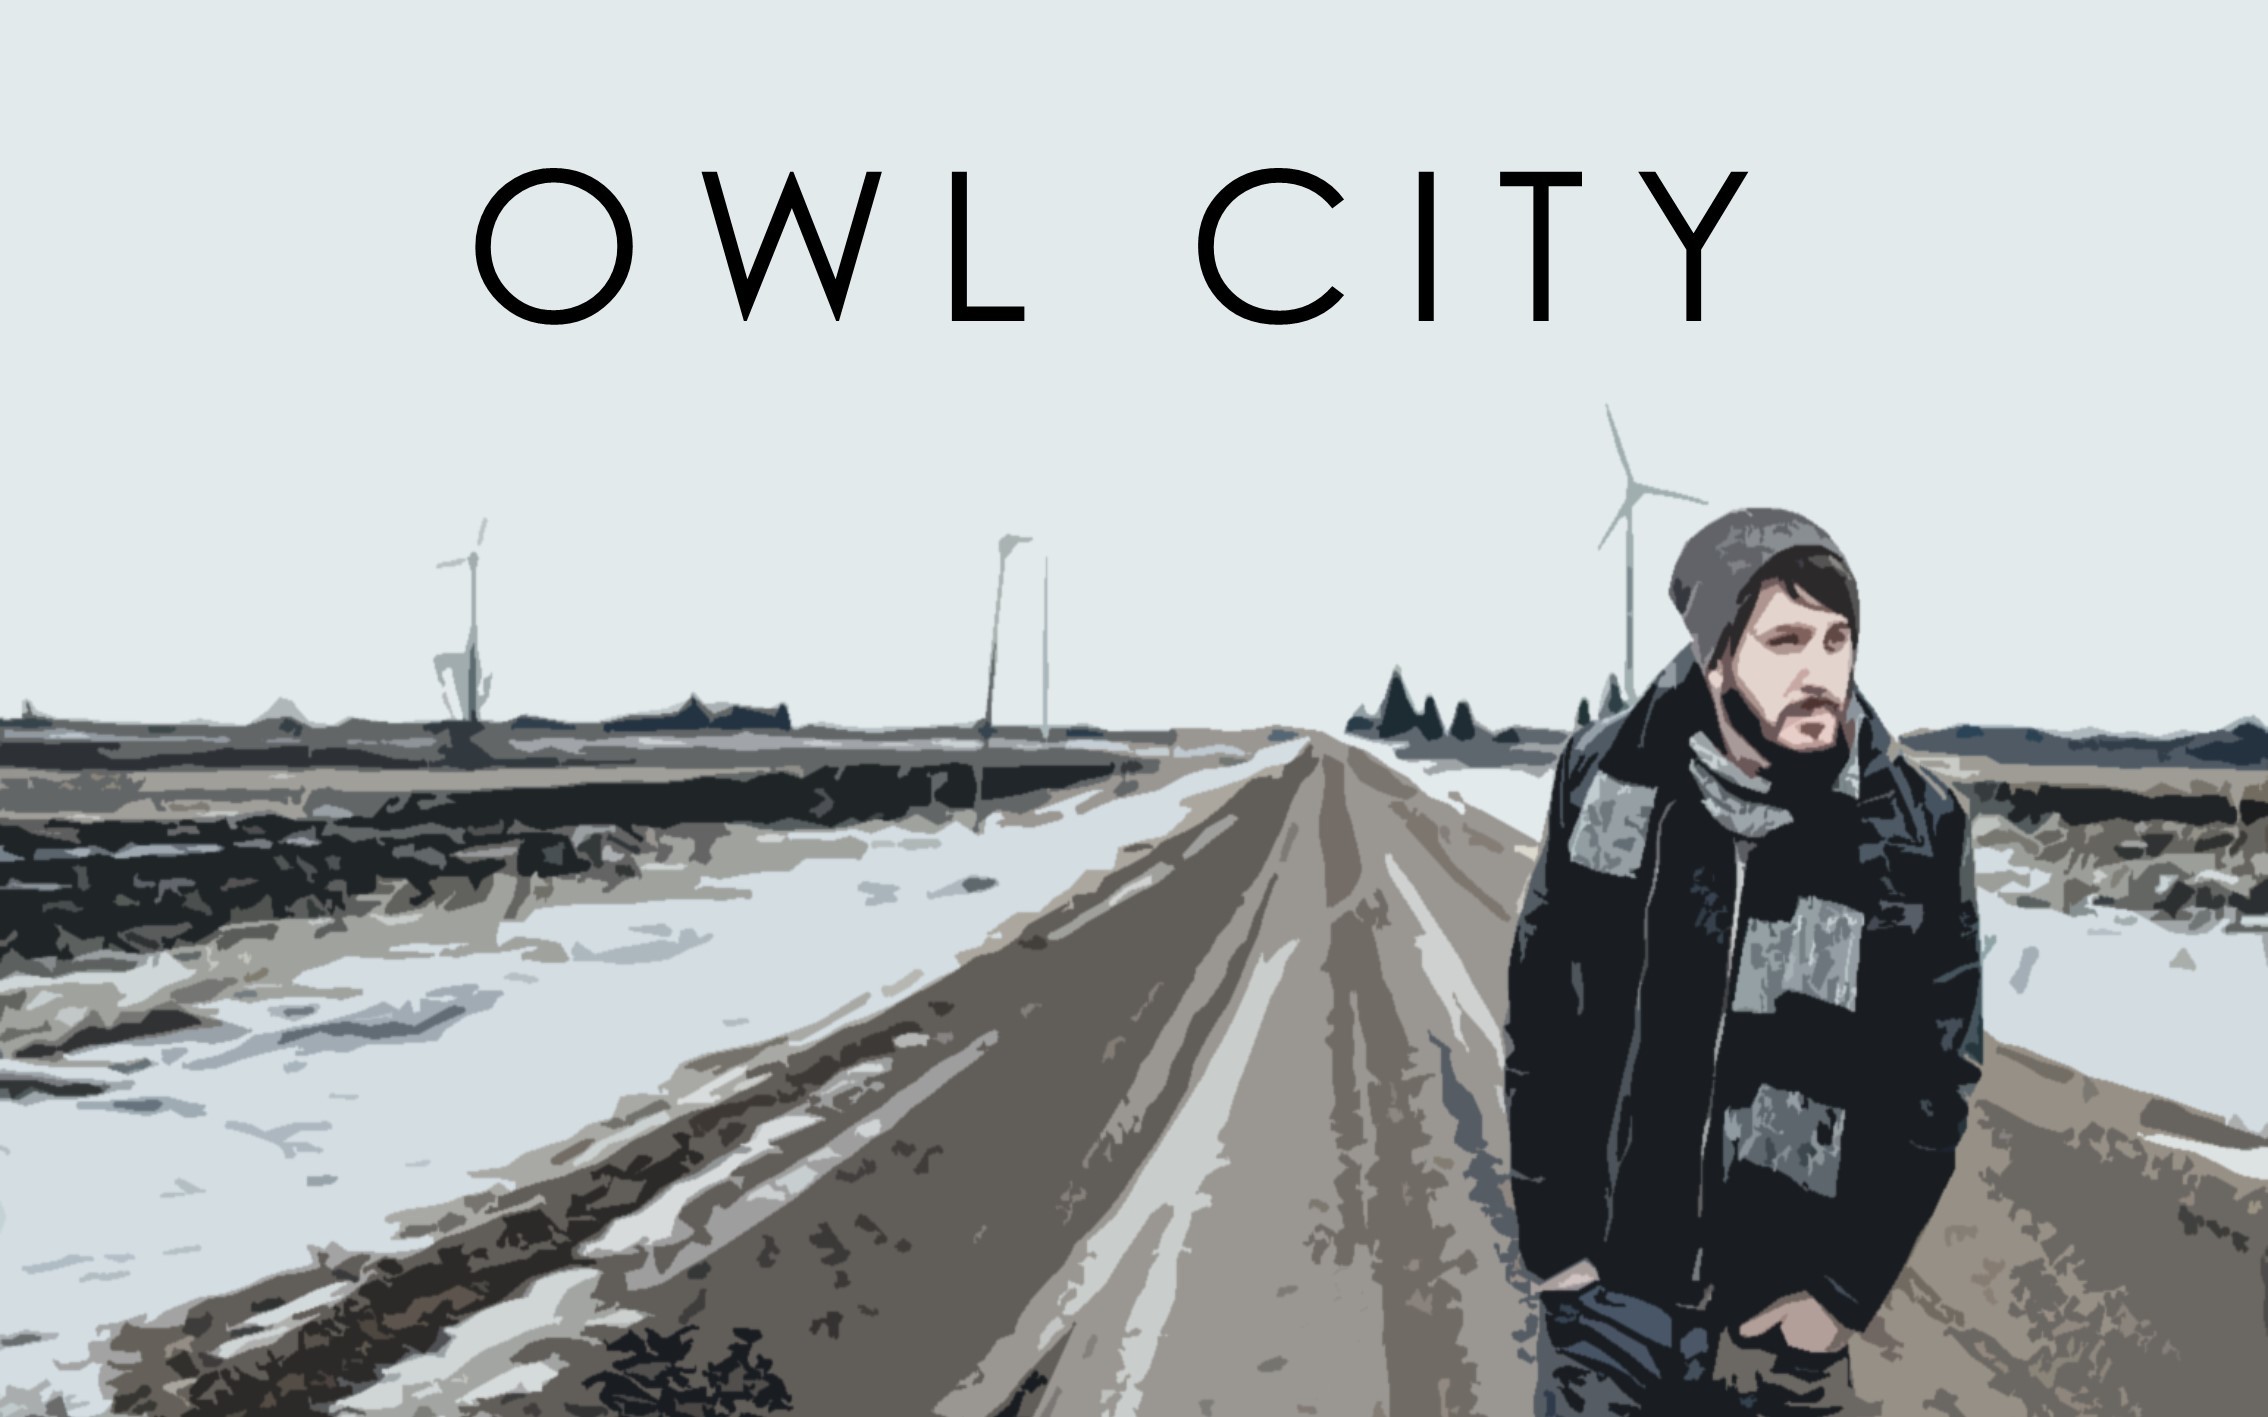 2268x1417 Owl City Wallpaper by ThatGuyInThePicture Owl City Wallpaper by  ThatGuyInThePicture